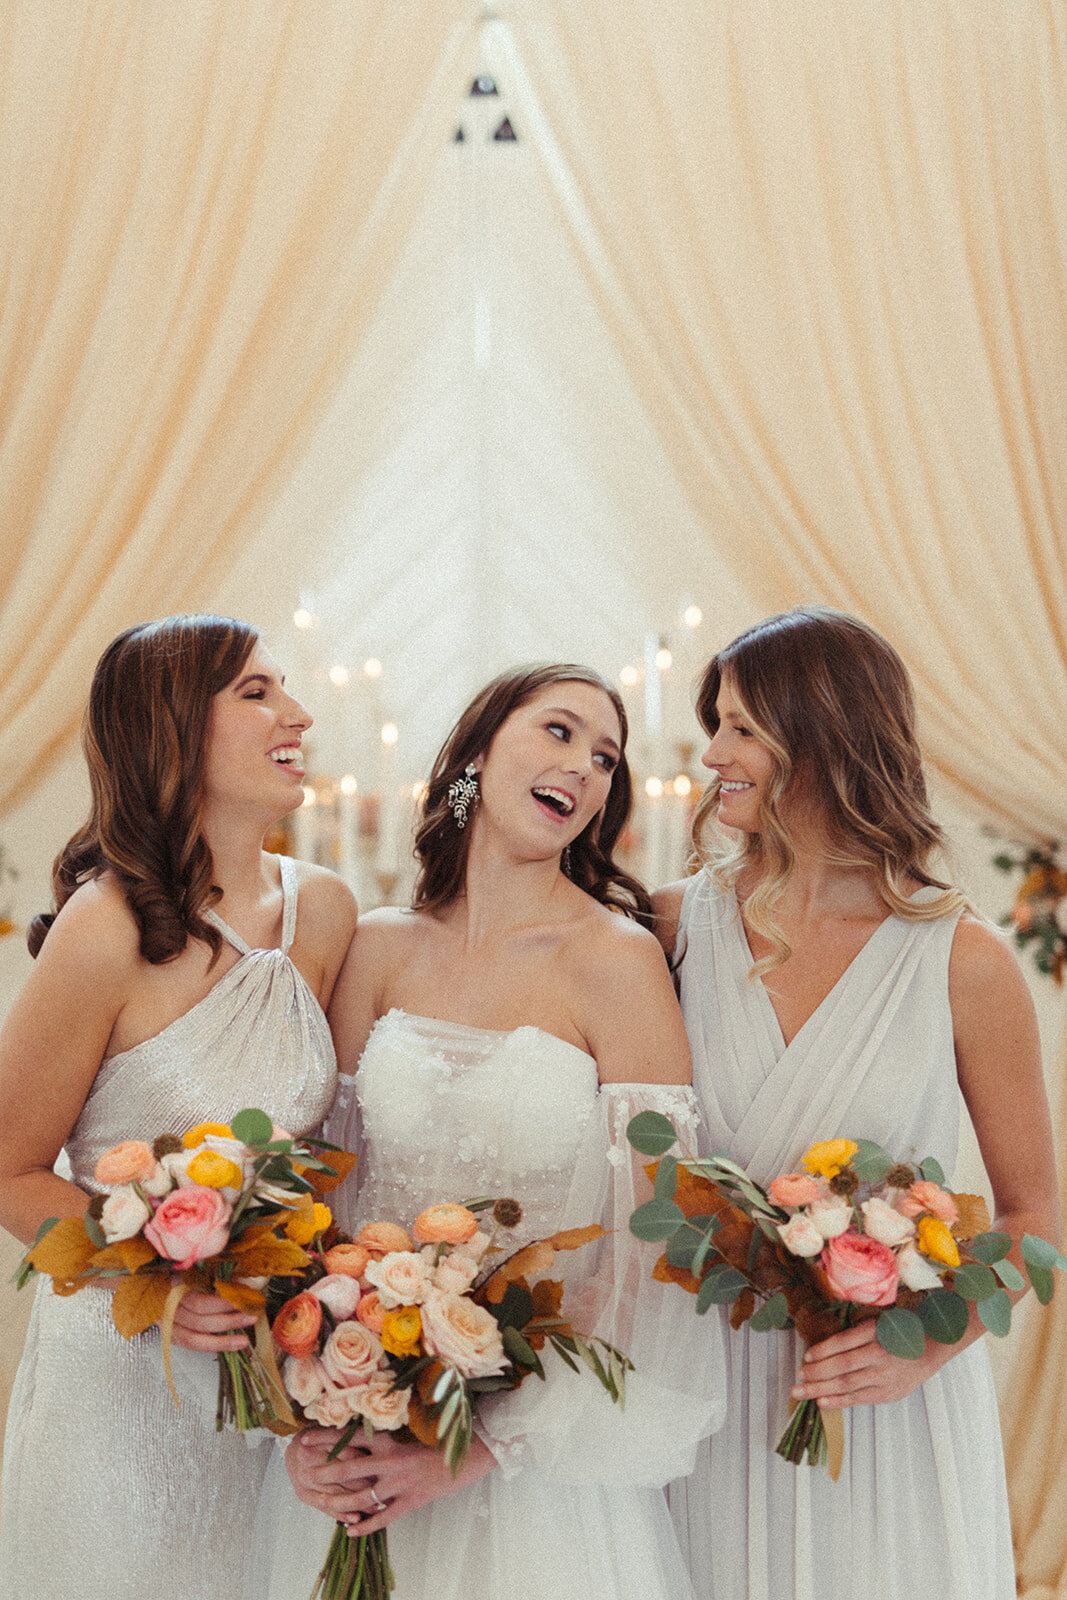 A bride wearing a white wedding gown poses smiling with bridesmaids wearing light gray gowns with bouquets in hand.